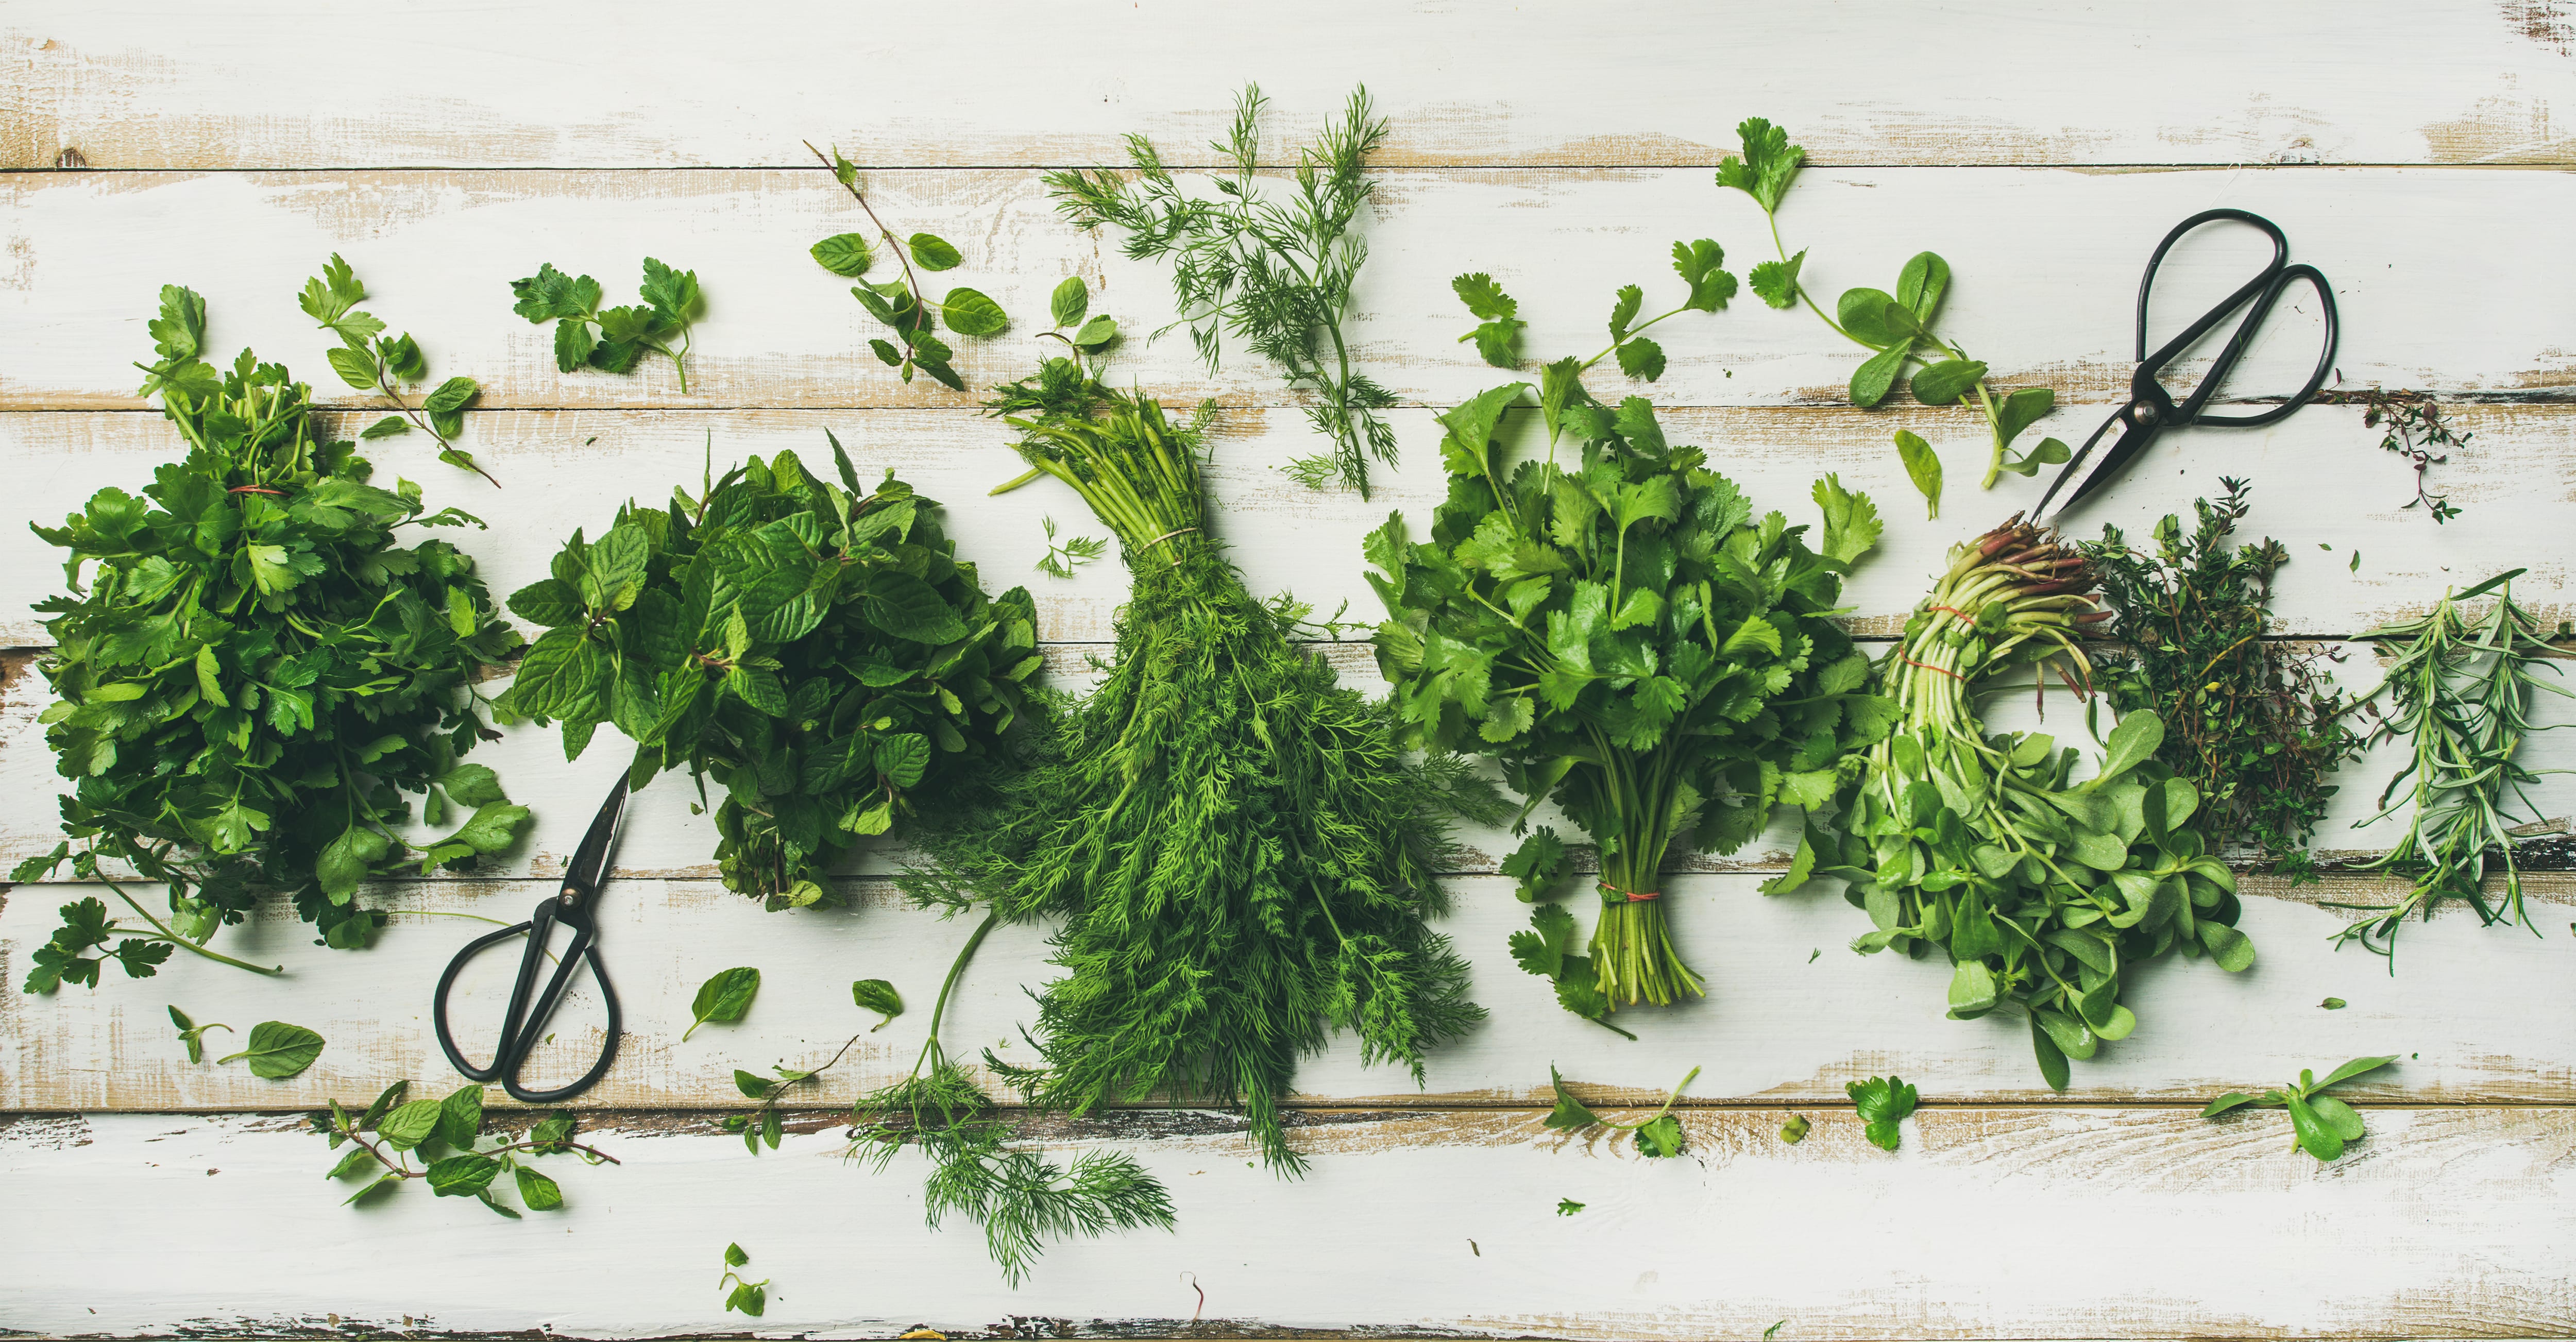 Flat-lay of bunches of various fresh green kitchen herbs. Parsley, mint, dill, cilantro, rosemary, thyme over white wooden background, top view. Spring or summer healthy vegan cooking concept